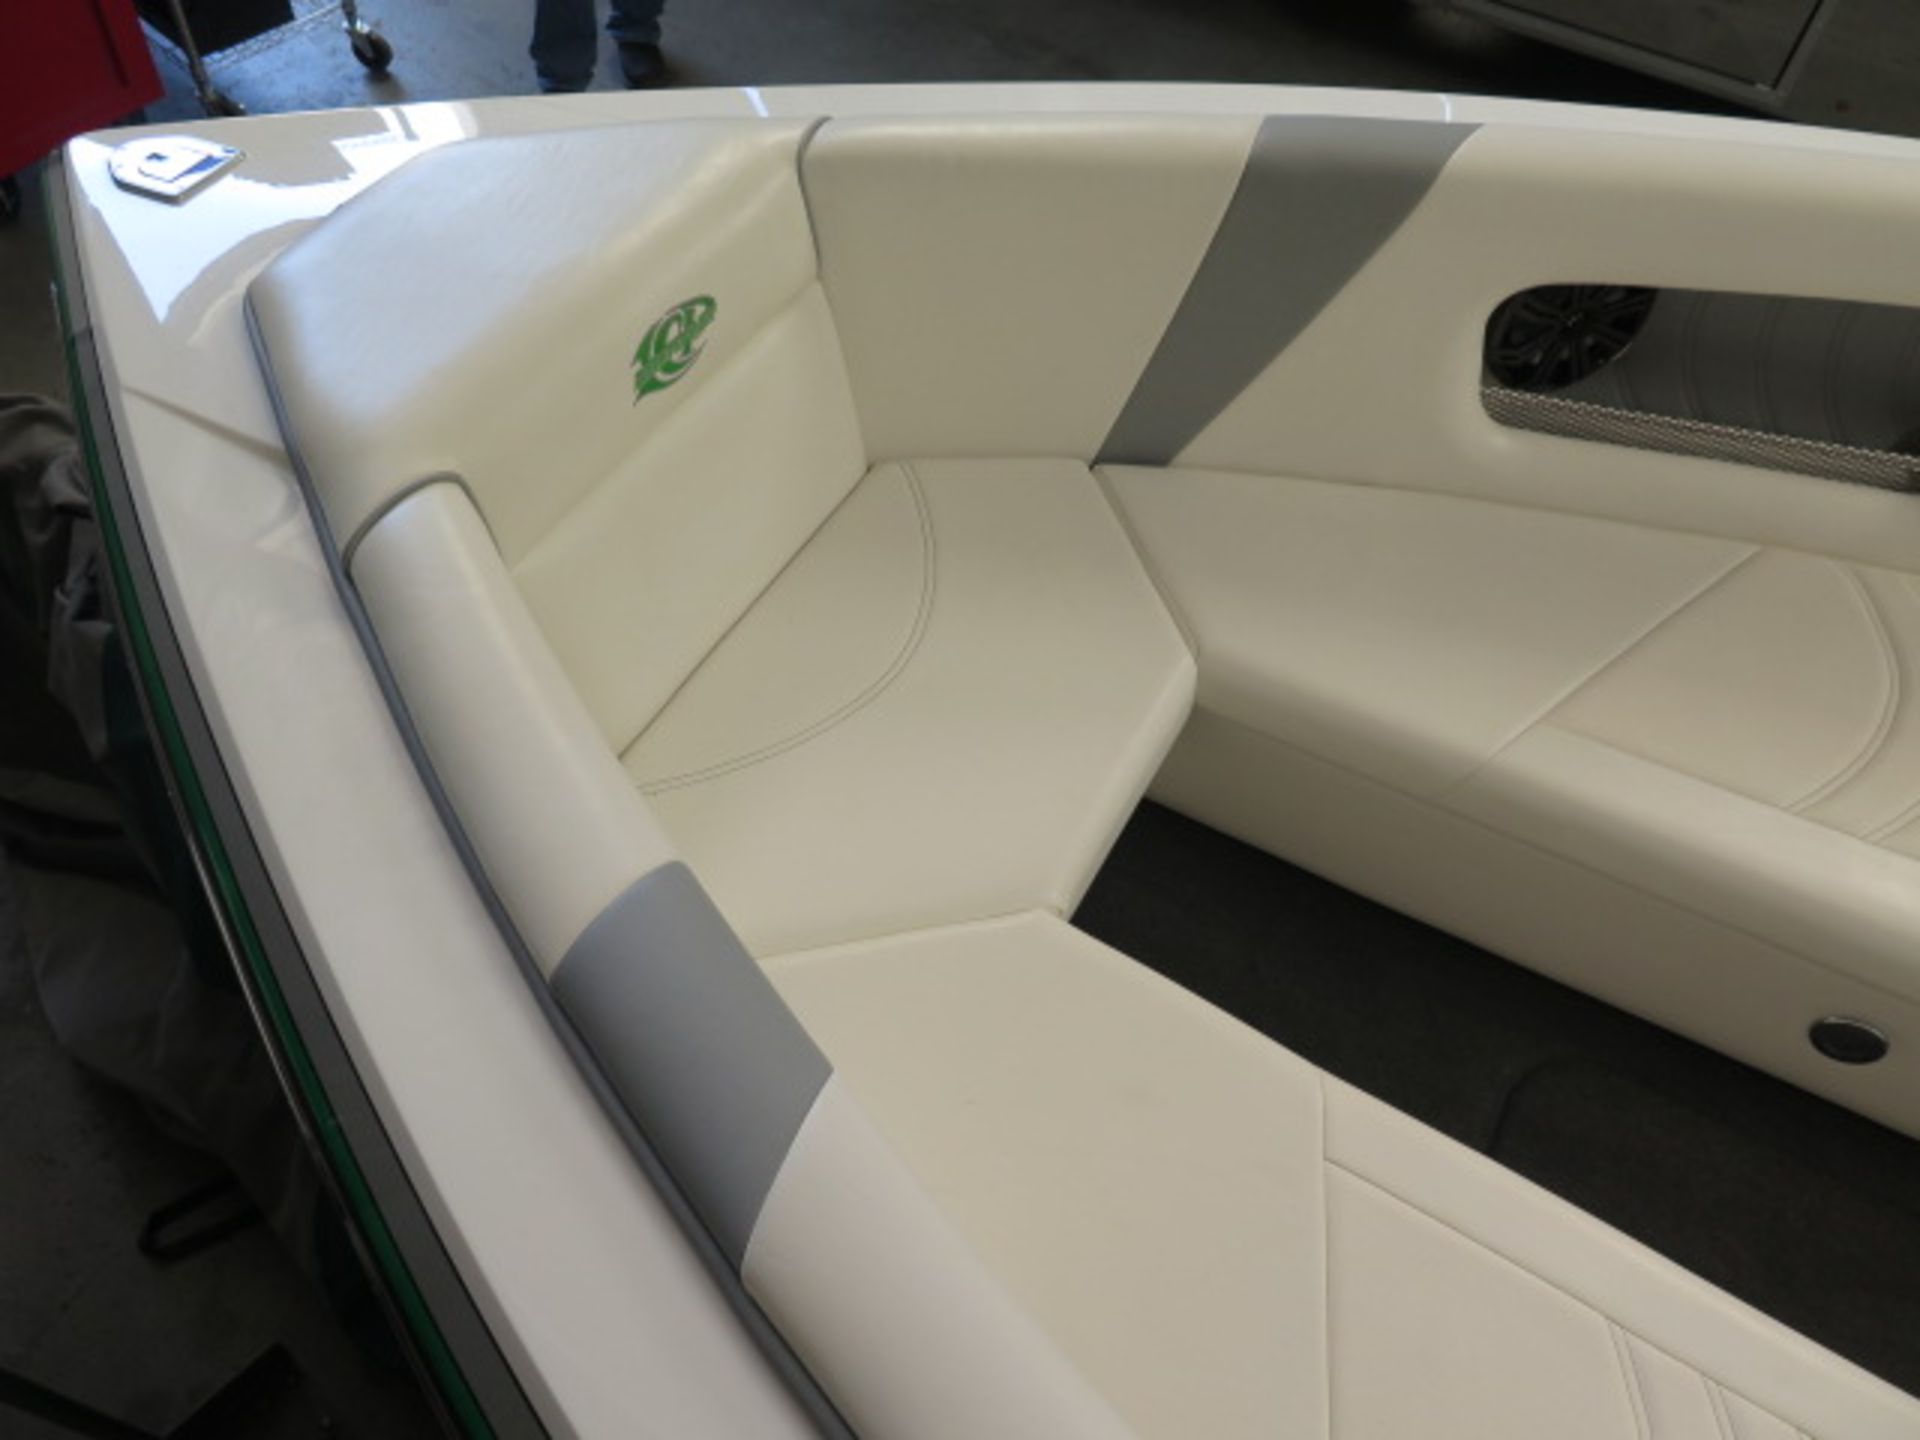 2020 Laveycraft 24' V-Bottom Open Bow Boat w/ Custon Martinez Interior, Boostpower 675Hp, SOLD AS IS - Image 14 of 40